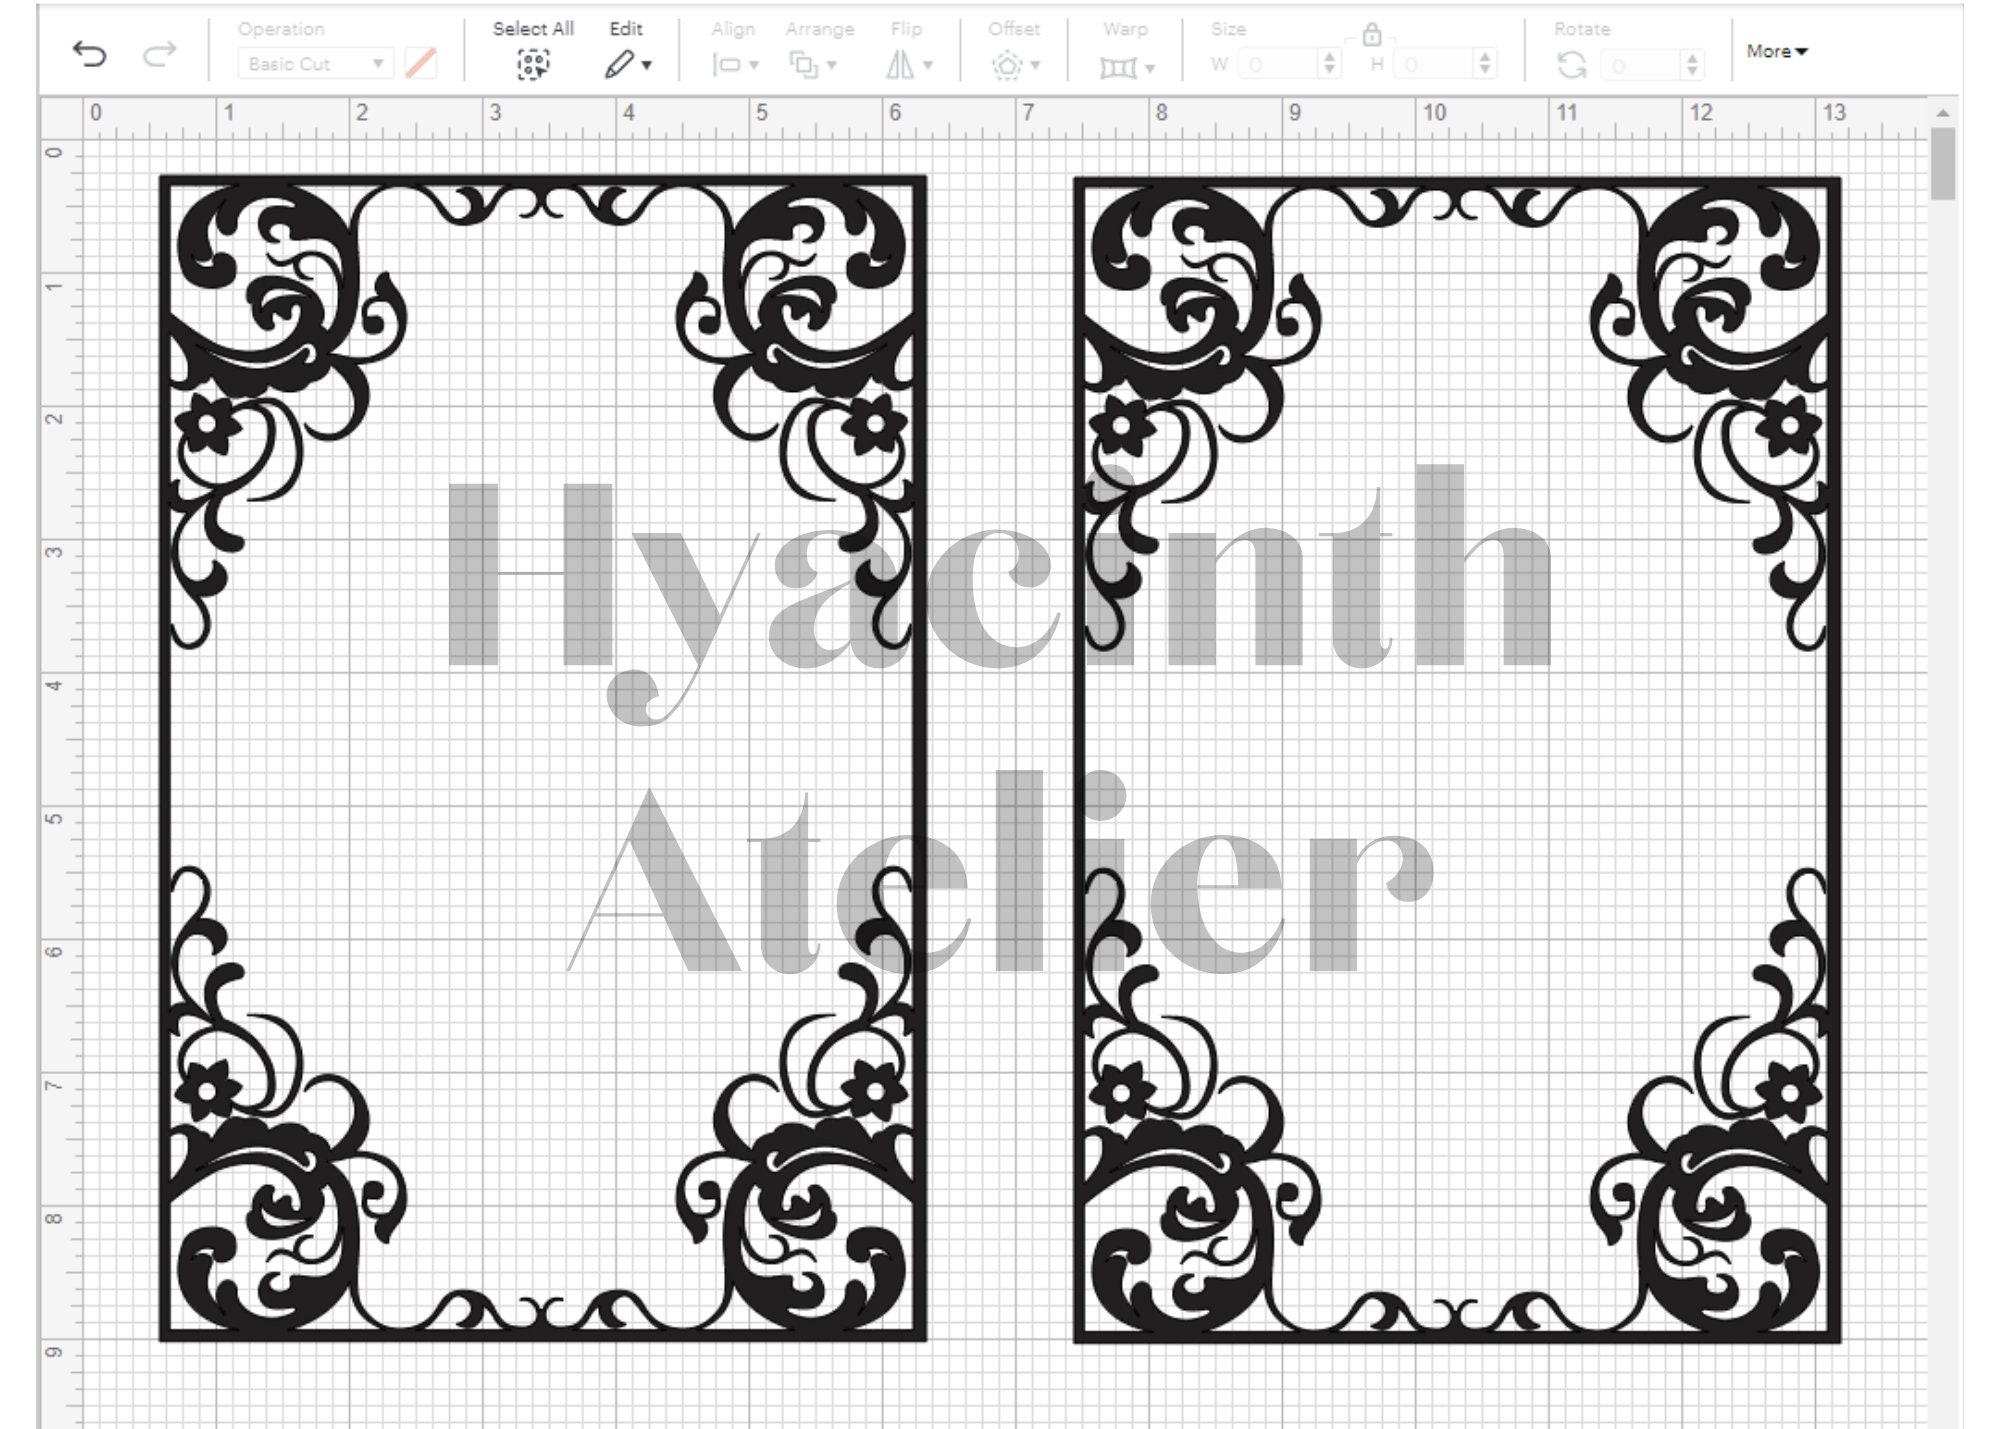 Book Cover SVG and Spine Decoration Cricut HTV File for